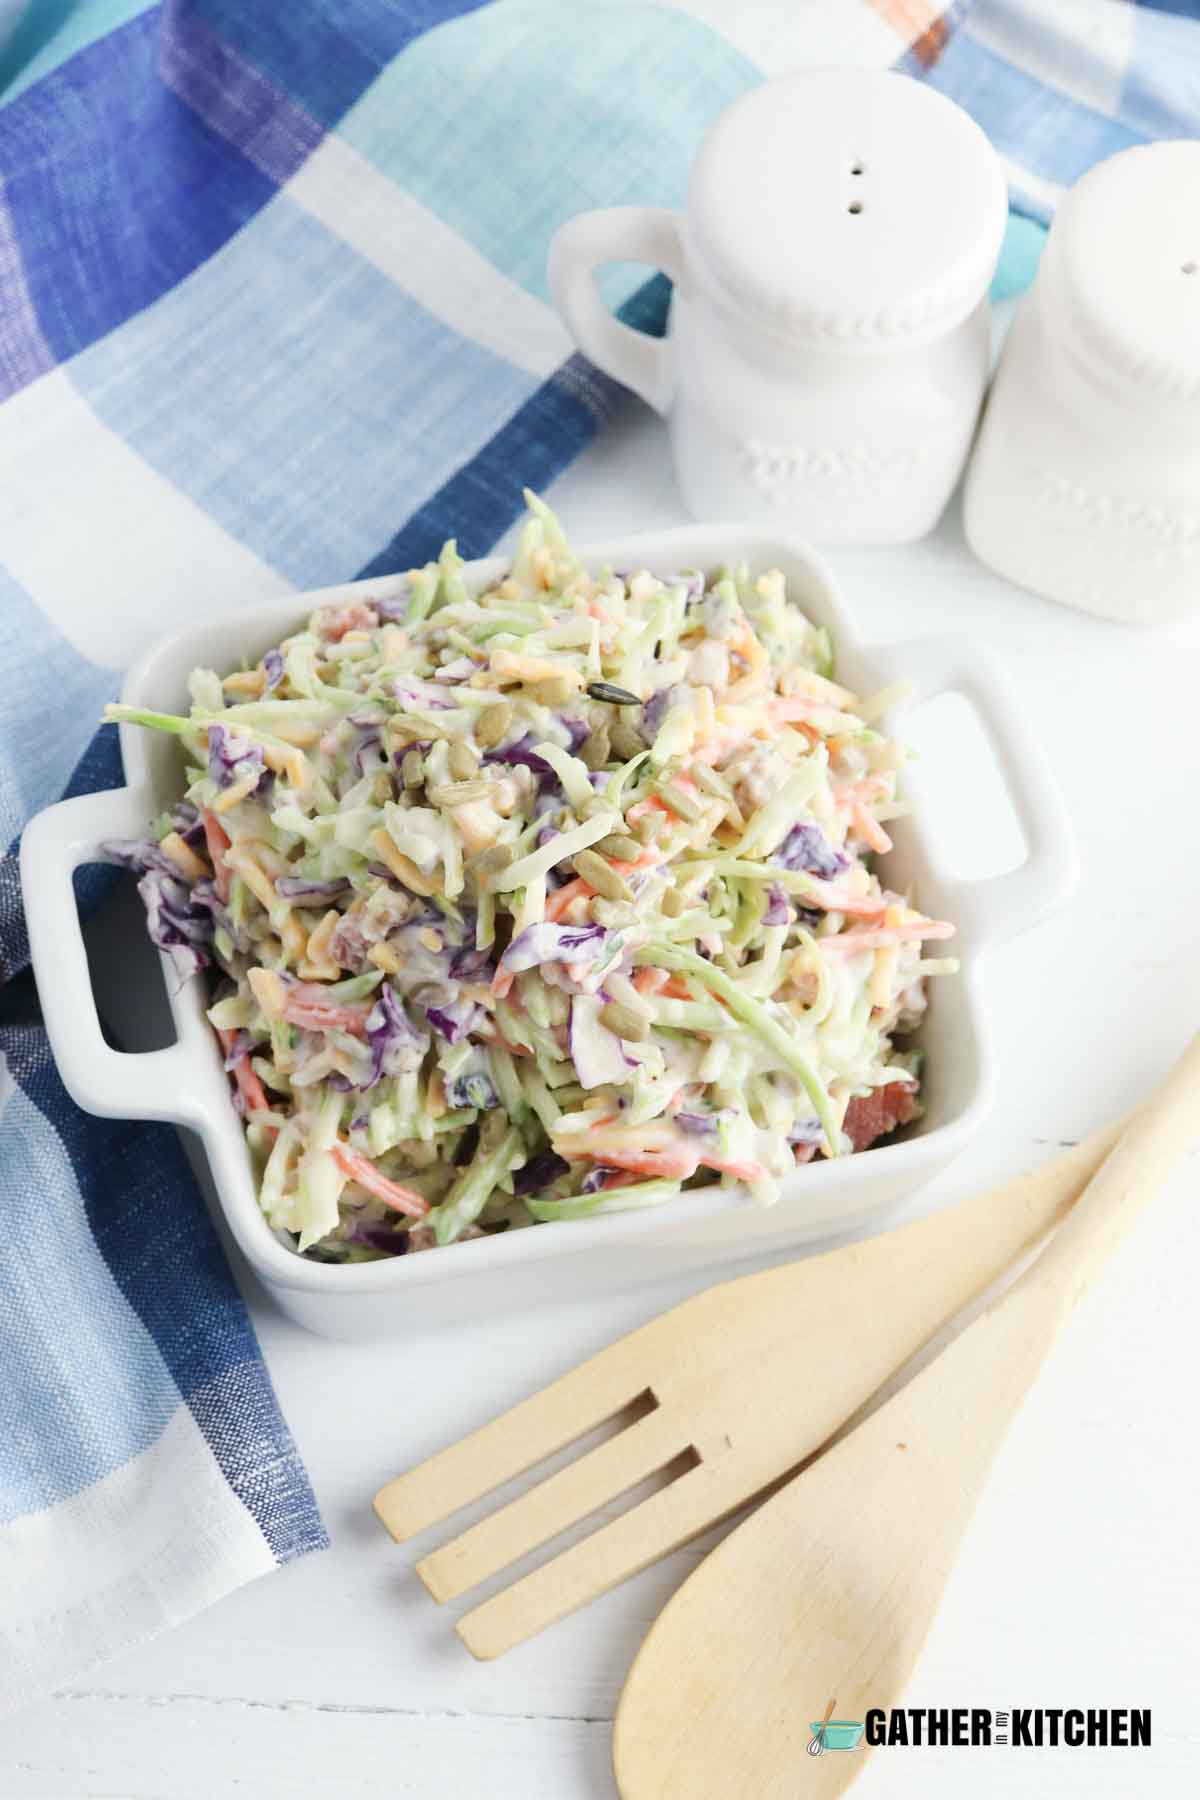 Top down view of broccoli slaw in a square white bowl.